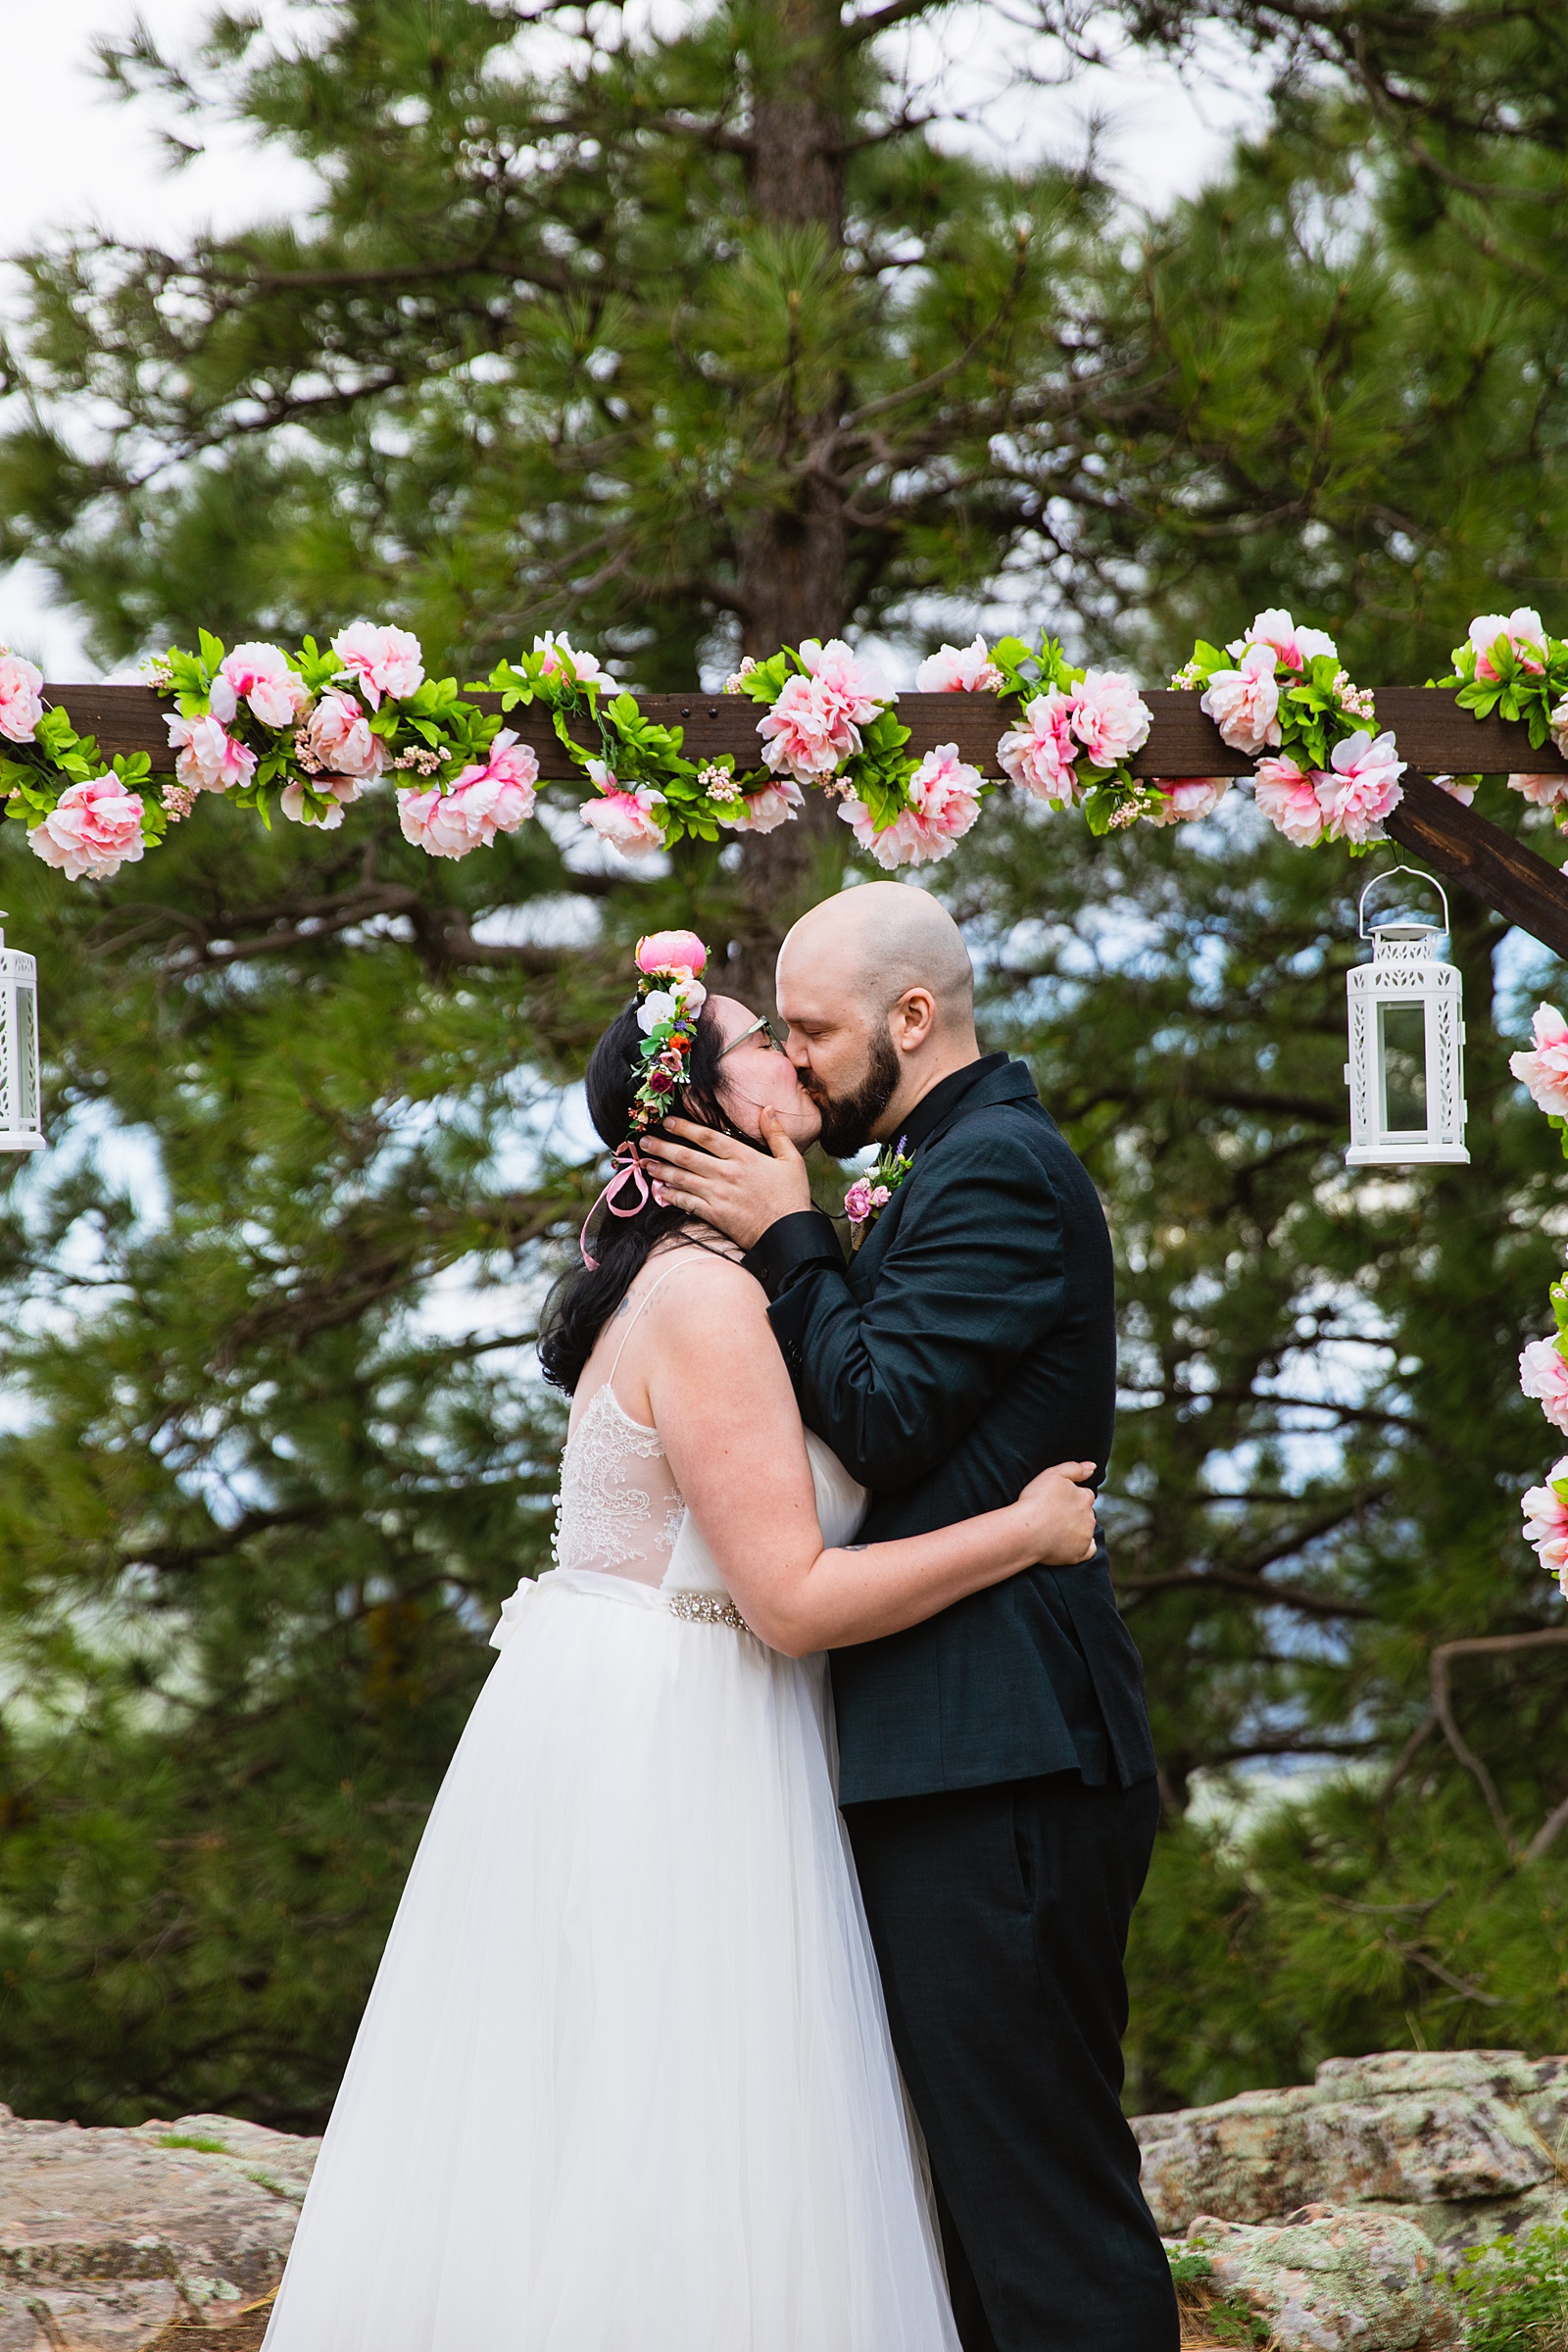 Bride & Groom share their first kiss during their wedding ceremony at Mogollon Rim by Arizona elopement photographer PMA Photography.